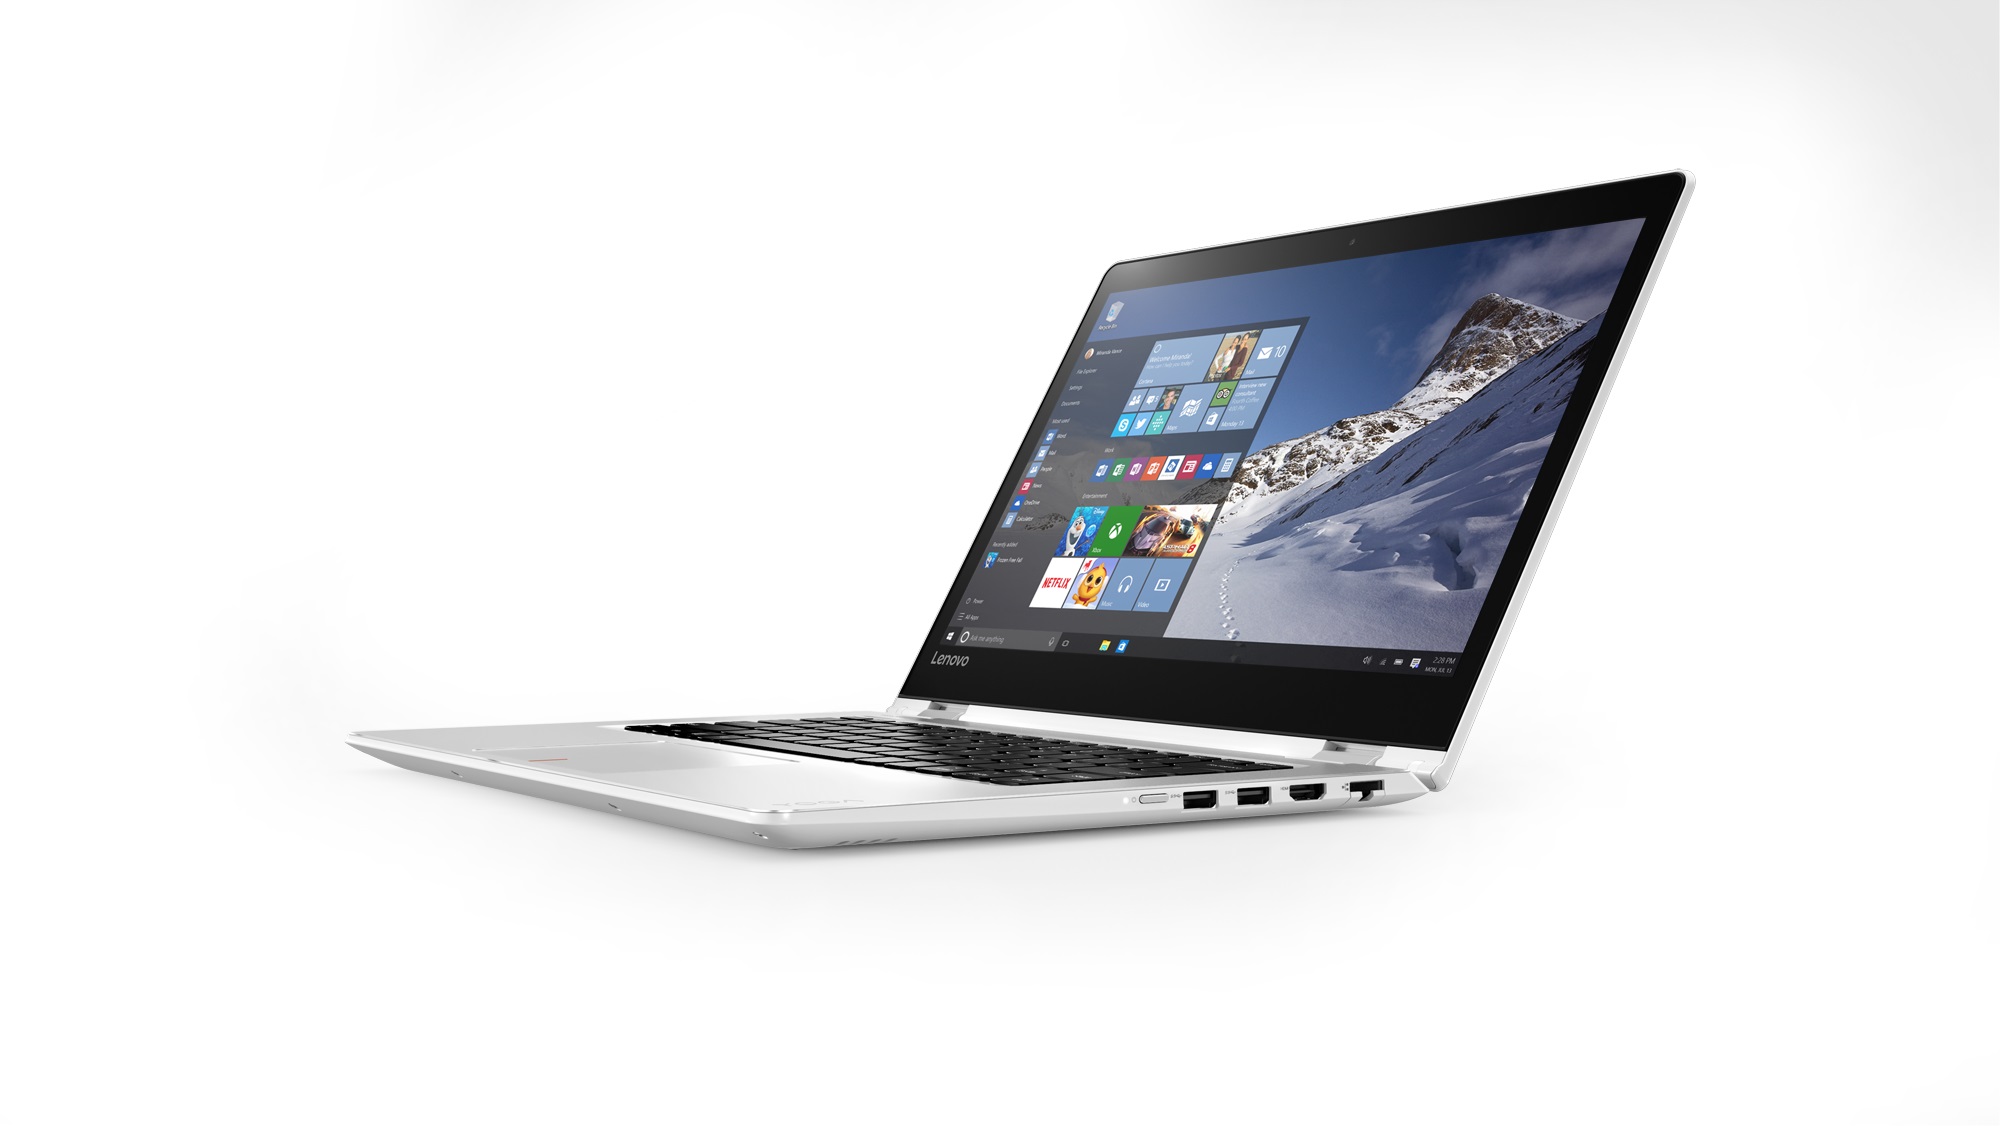 The Lenovo YOGA 510 comes ready-equipped with Windows 10.